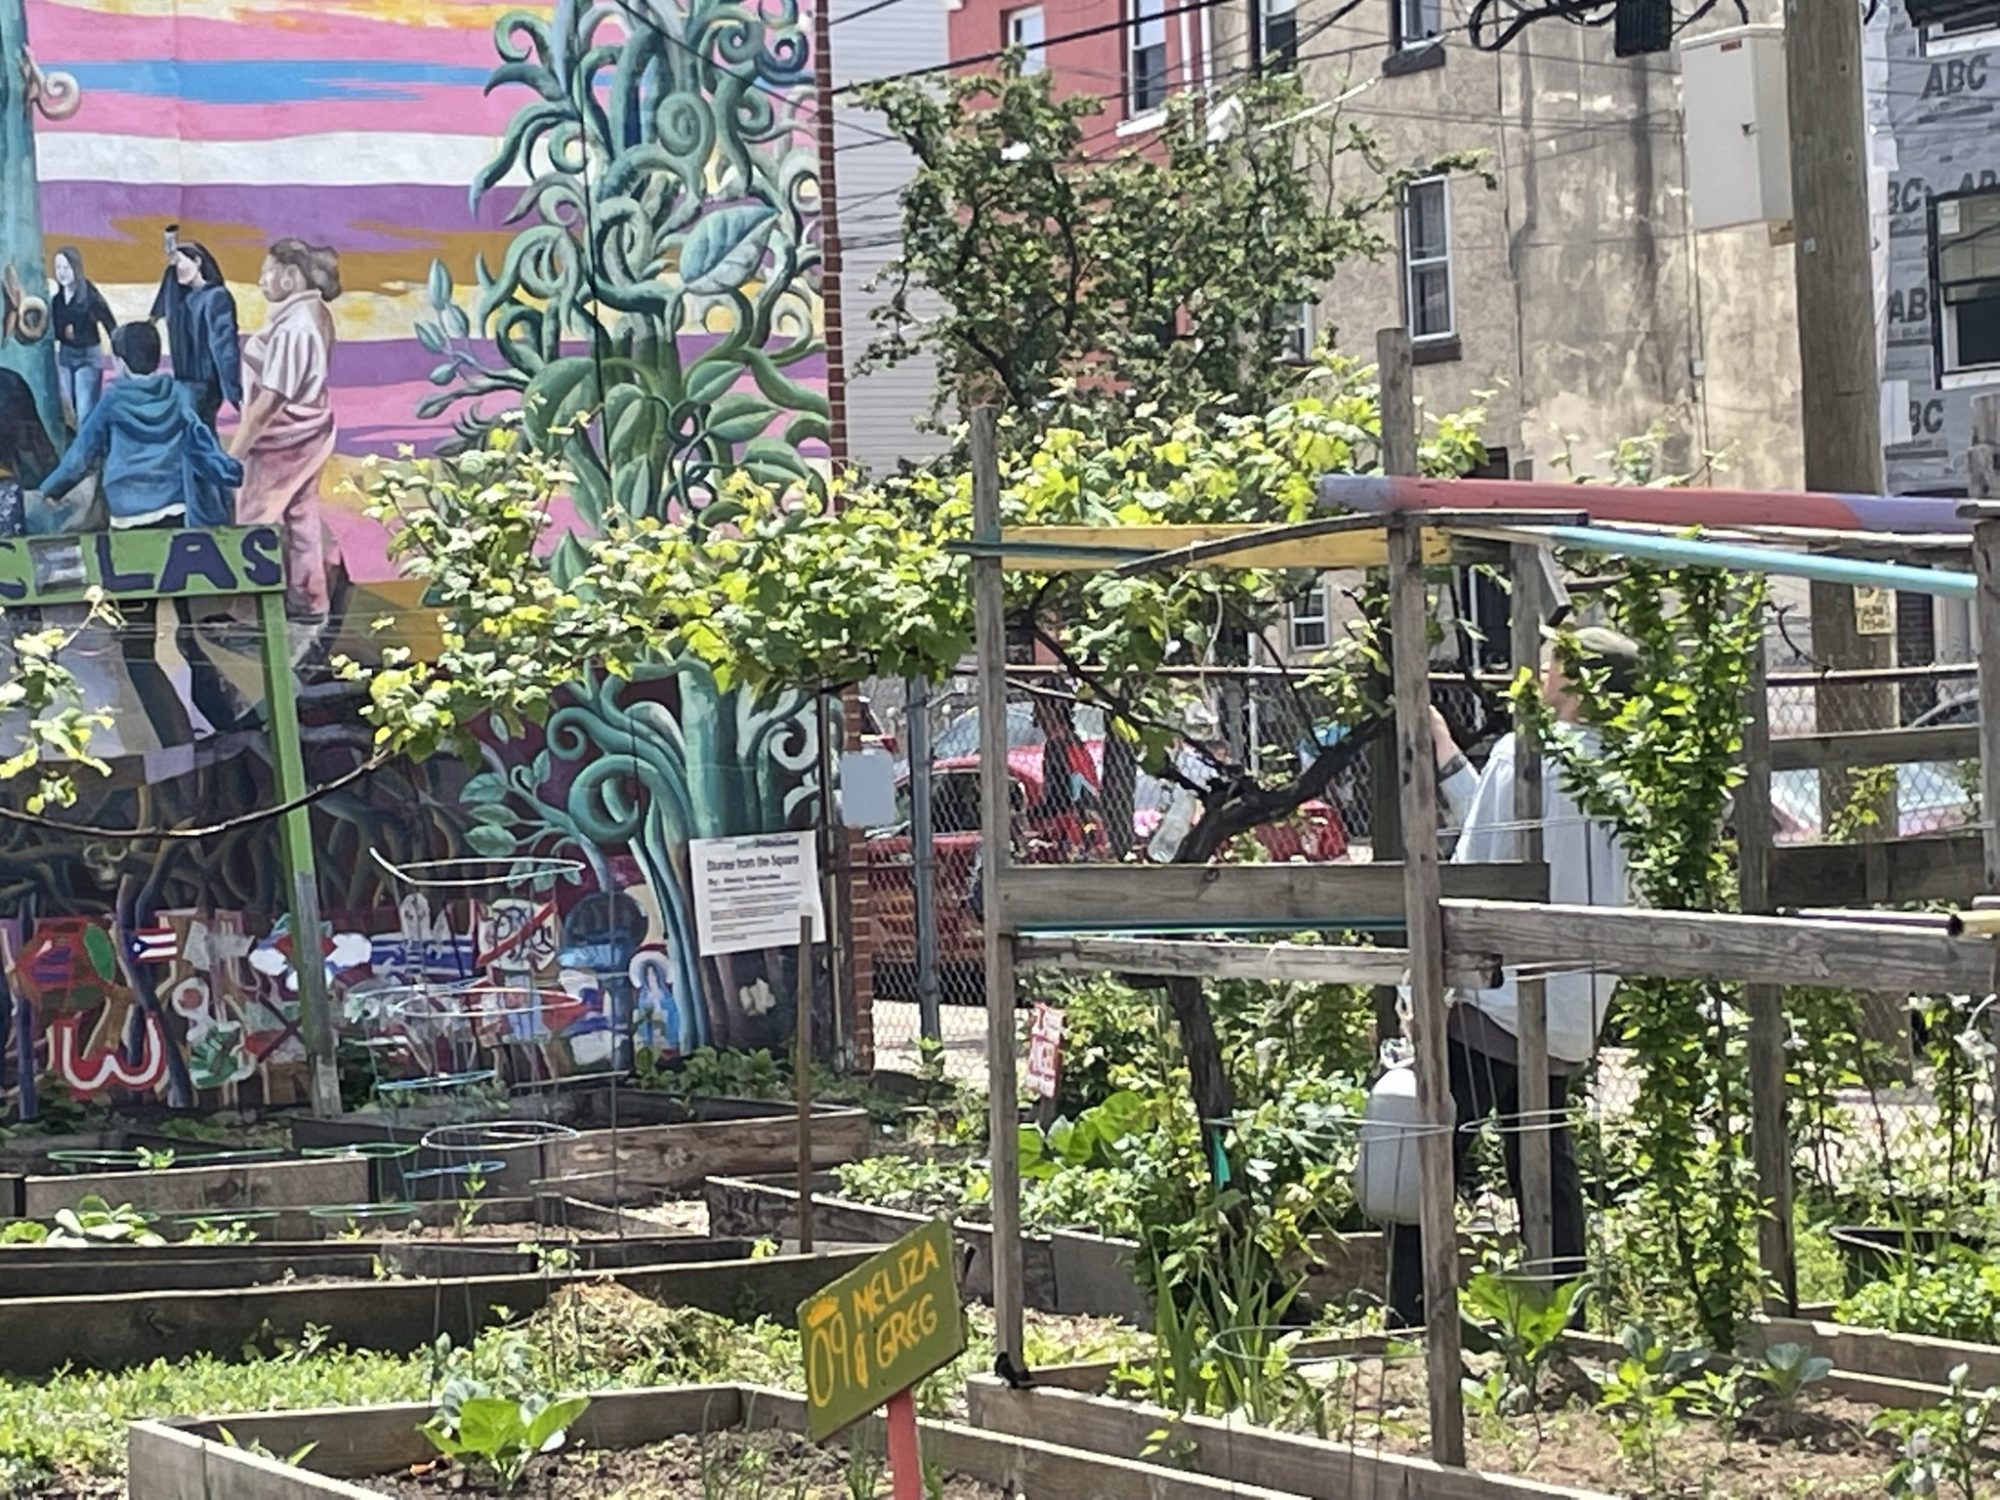 Spraying grapevines at Norris Square Neighborhood Project. A large colorful mural is seen in the background, and raised beds surround the grapevine structure.